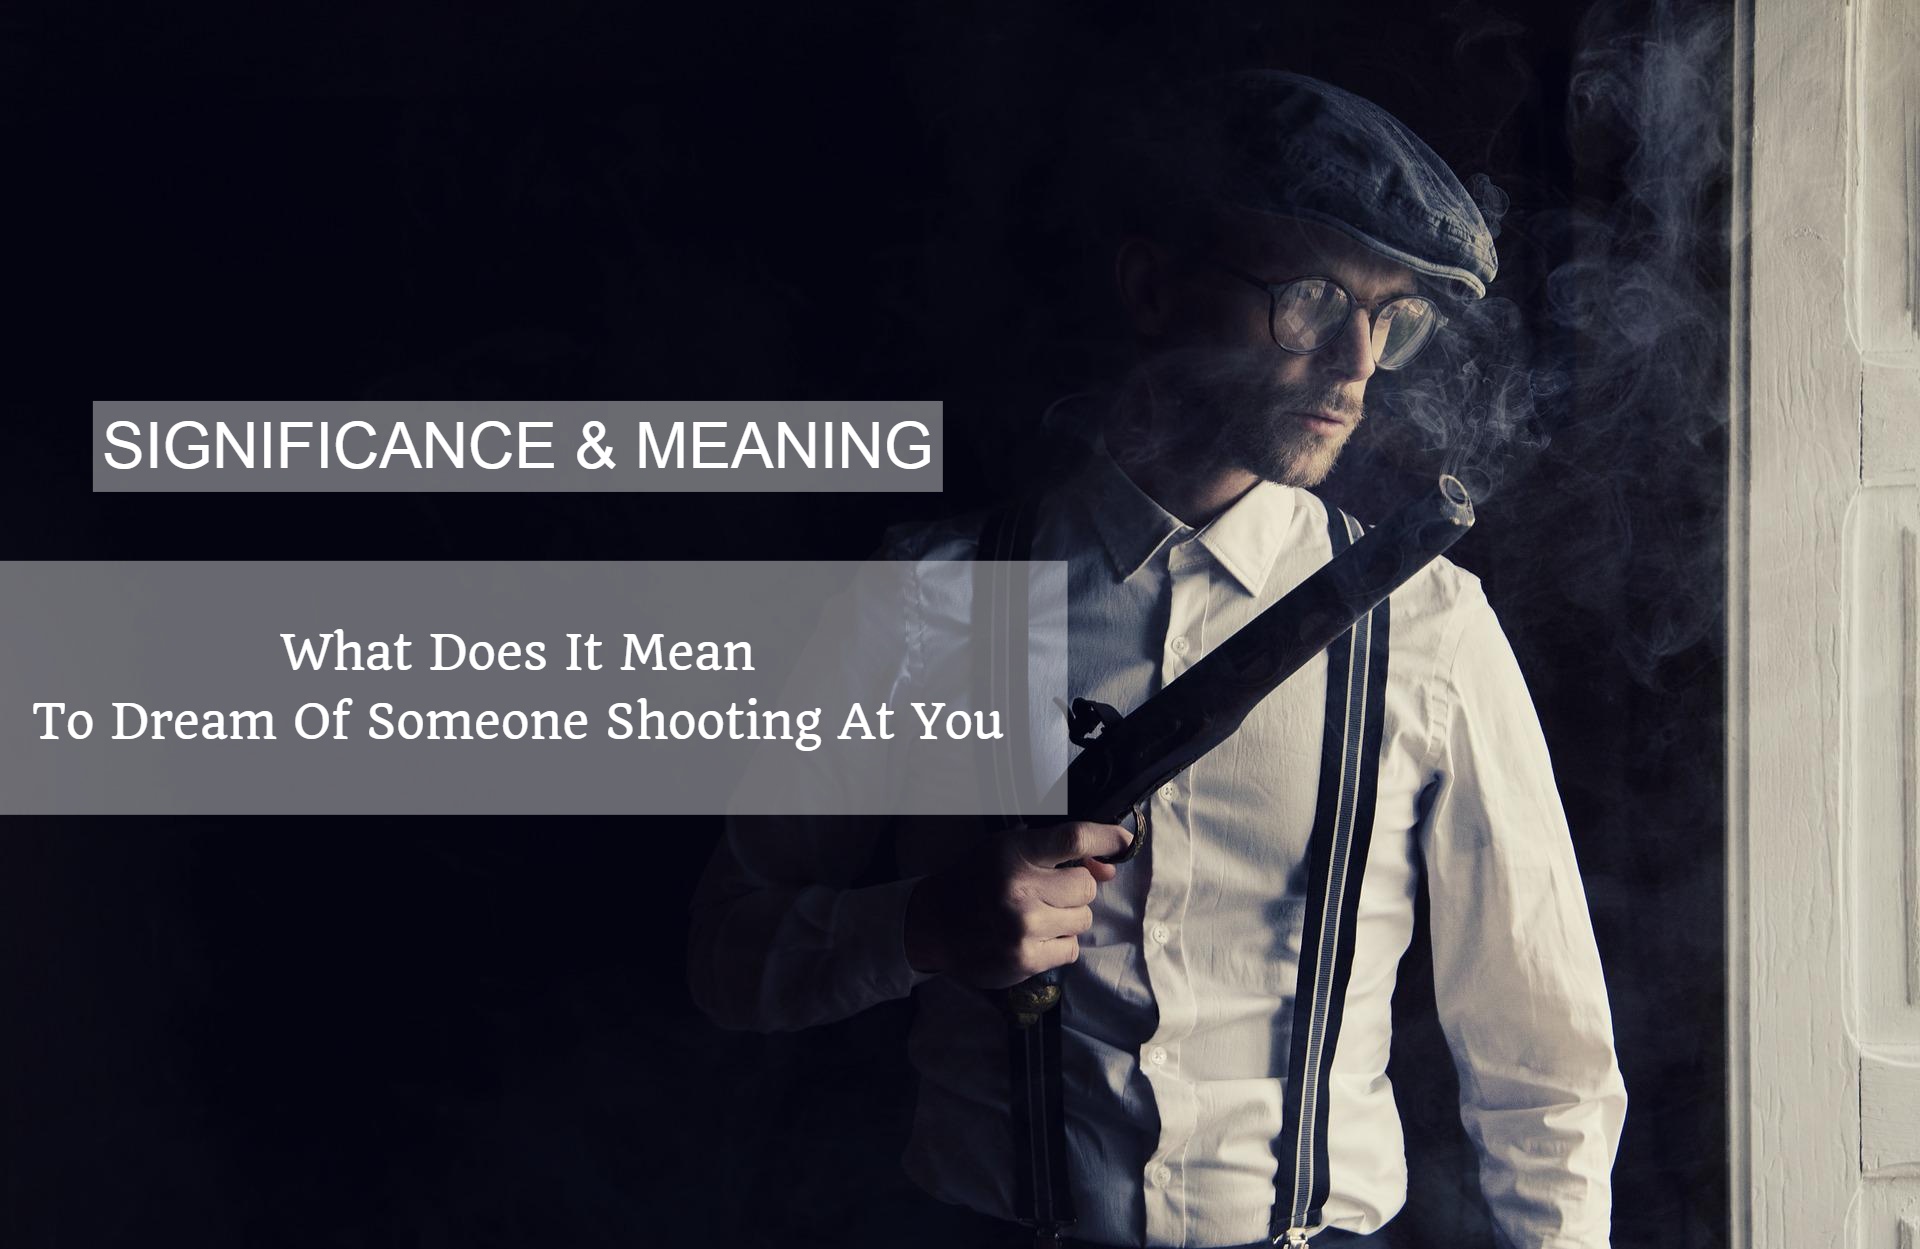 What Does It Mean To Dream Of Someone Shooting At You? Know Its Significance & Meaning